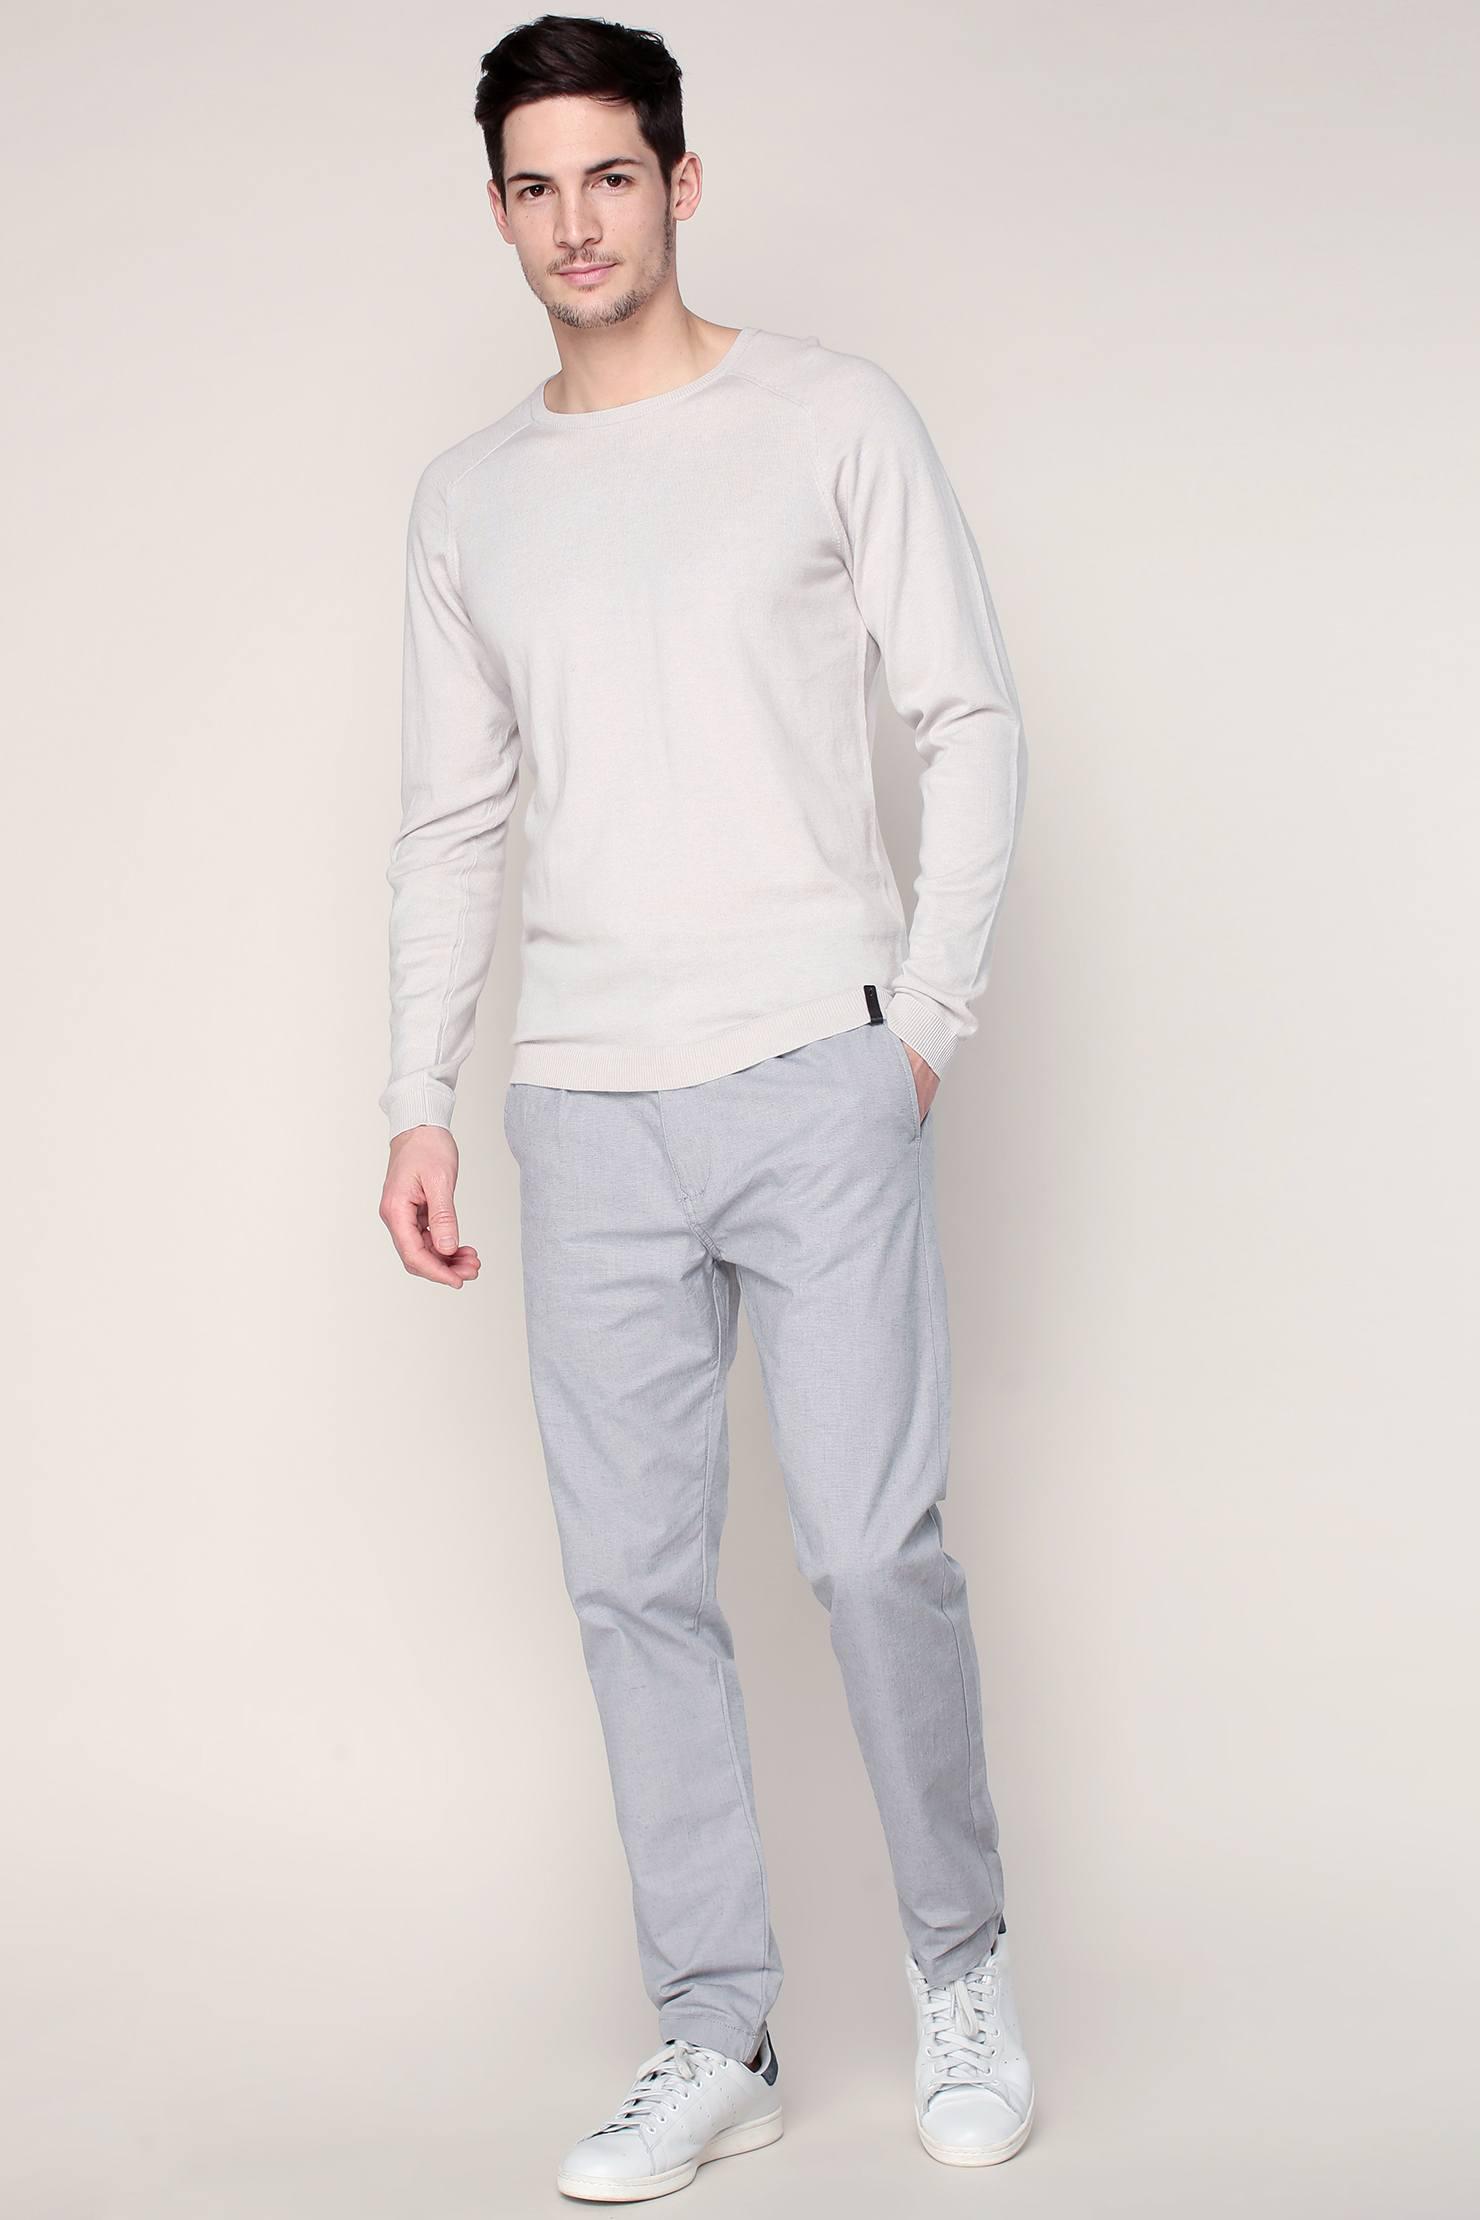 Lyst - Selected Trousers in Gray for Men